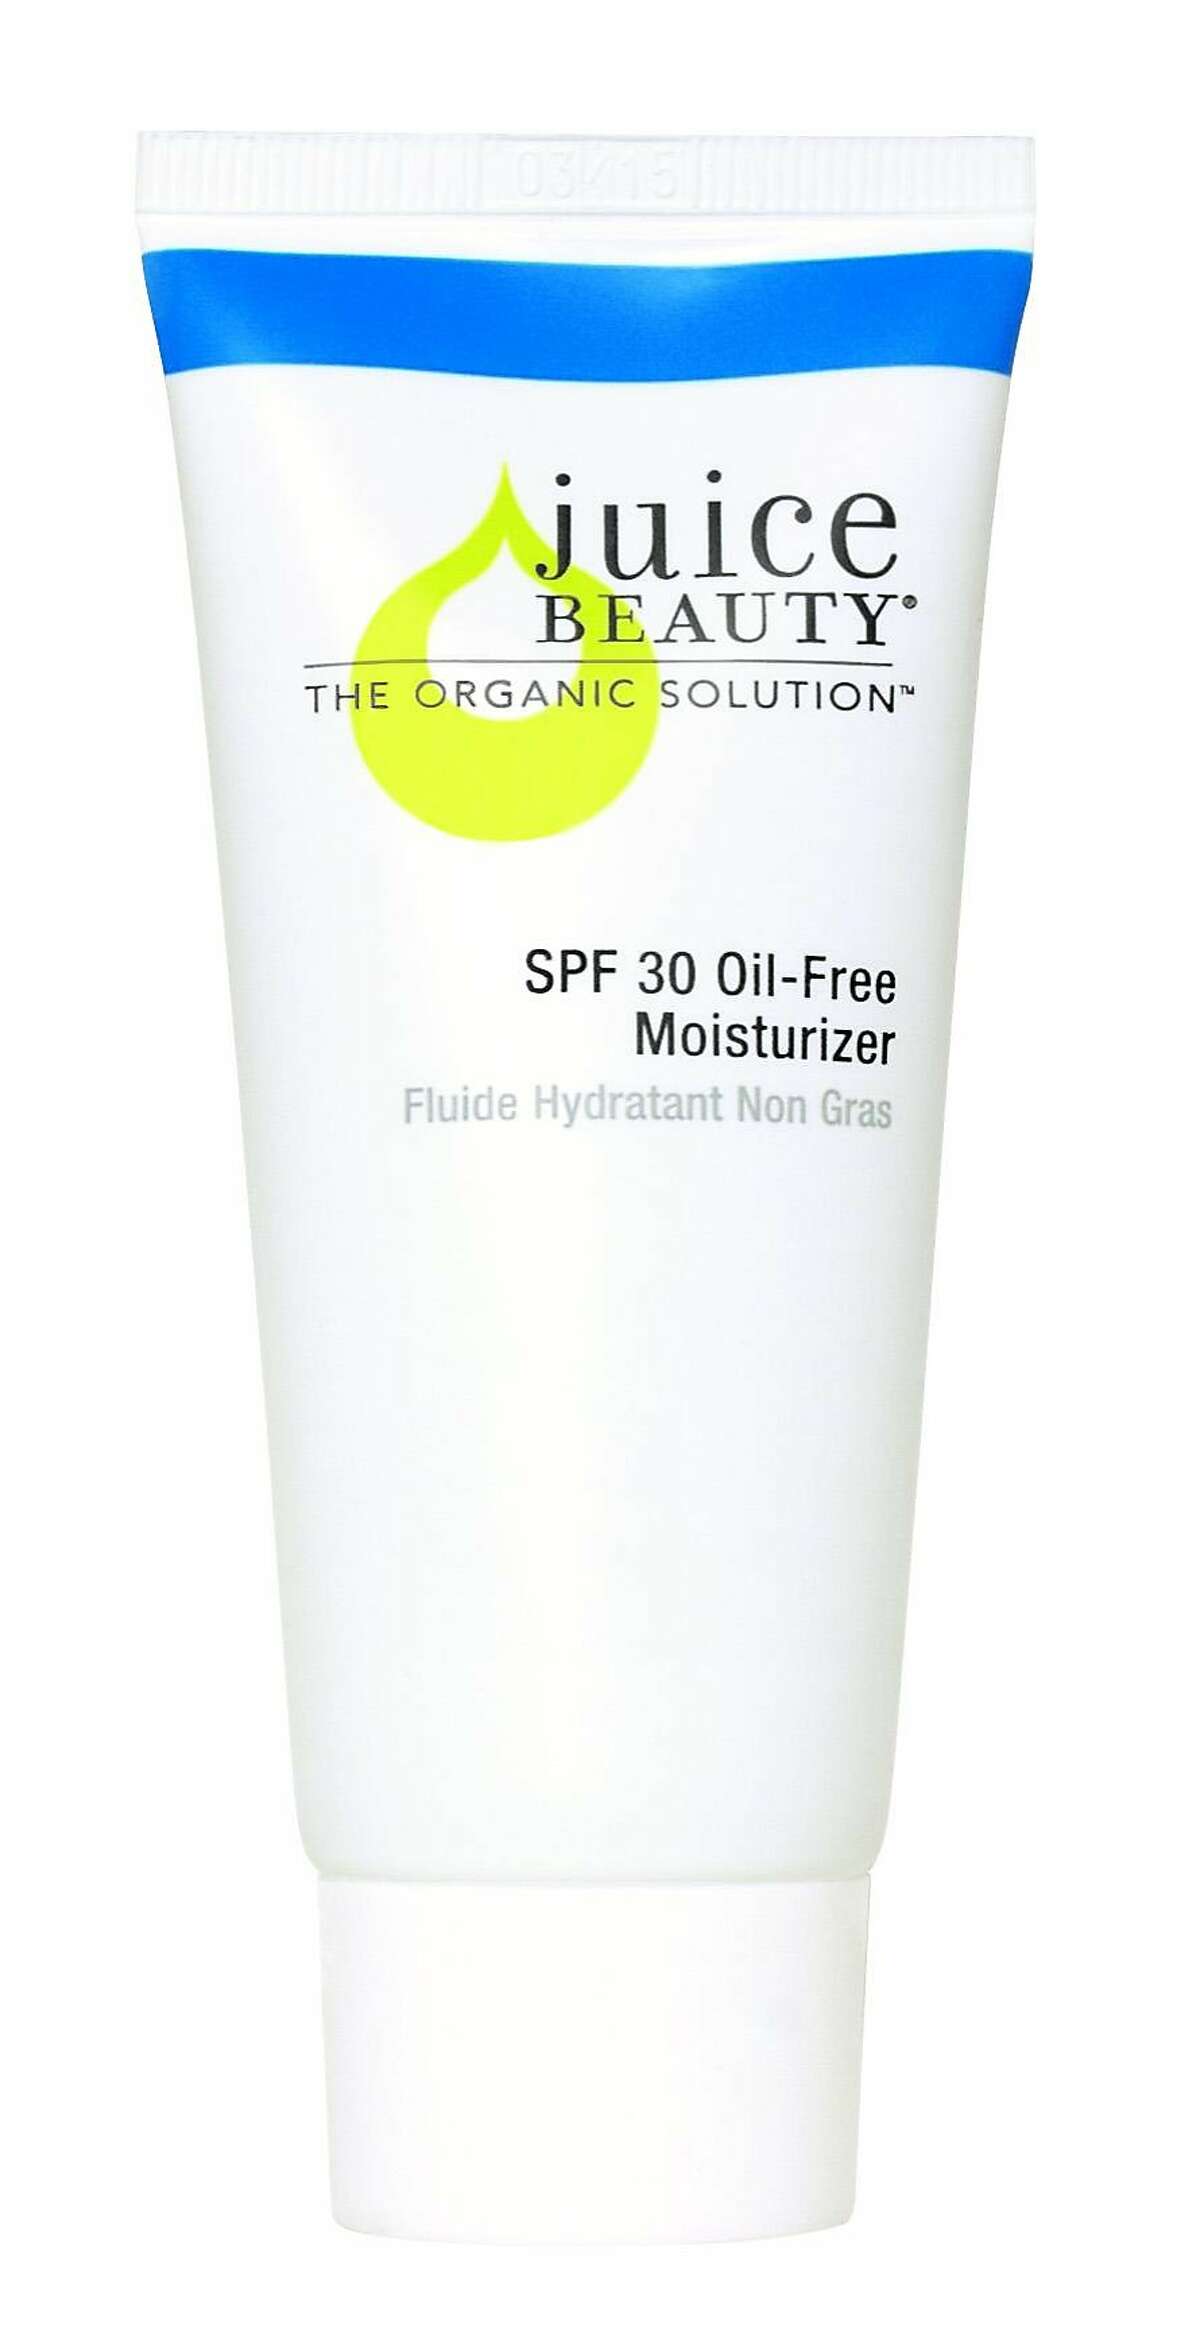 Juice Beauty�s SPF 30 Oil-Free Moisturizer��($29, 2 oz., https://www.juicebeauty.com) is billed as a moisturizer � it contains a cocktail of apple, grape and aloe juice, plus hyaluronic acid � but 20 percent non-nano zinc oxide sunscreen is the active ingredient.